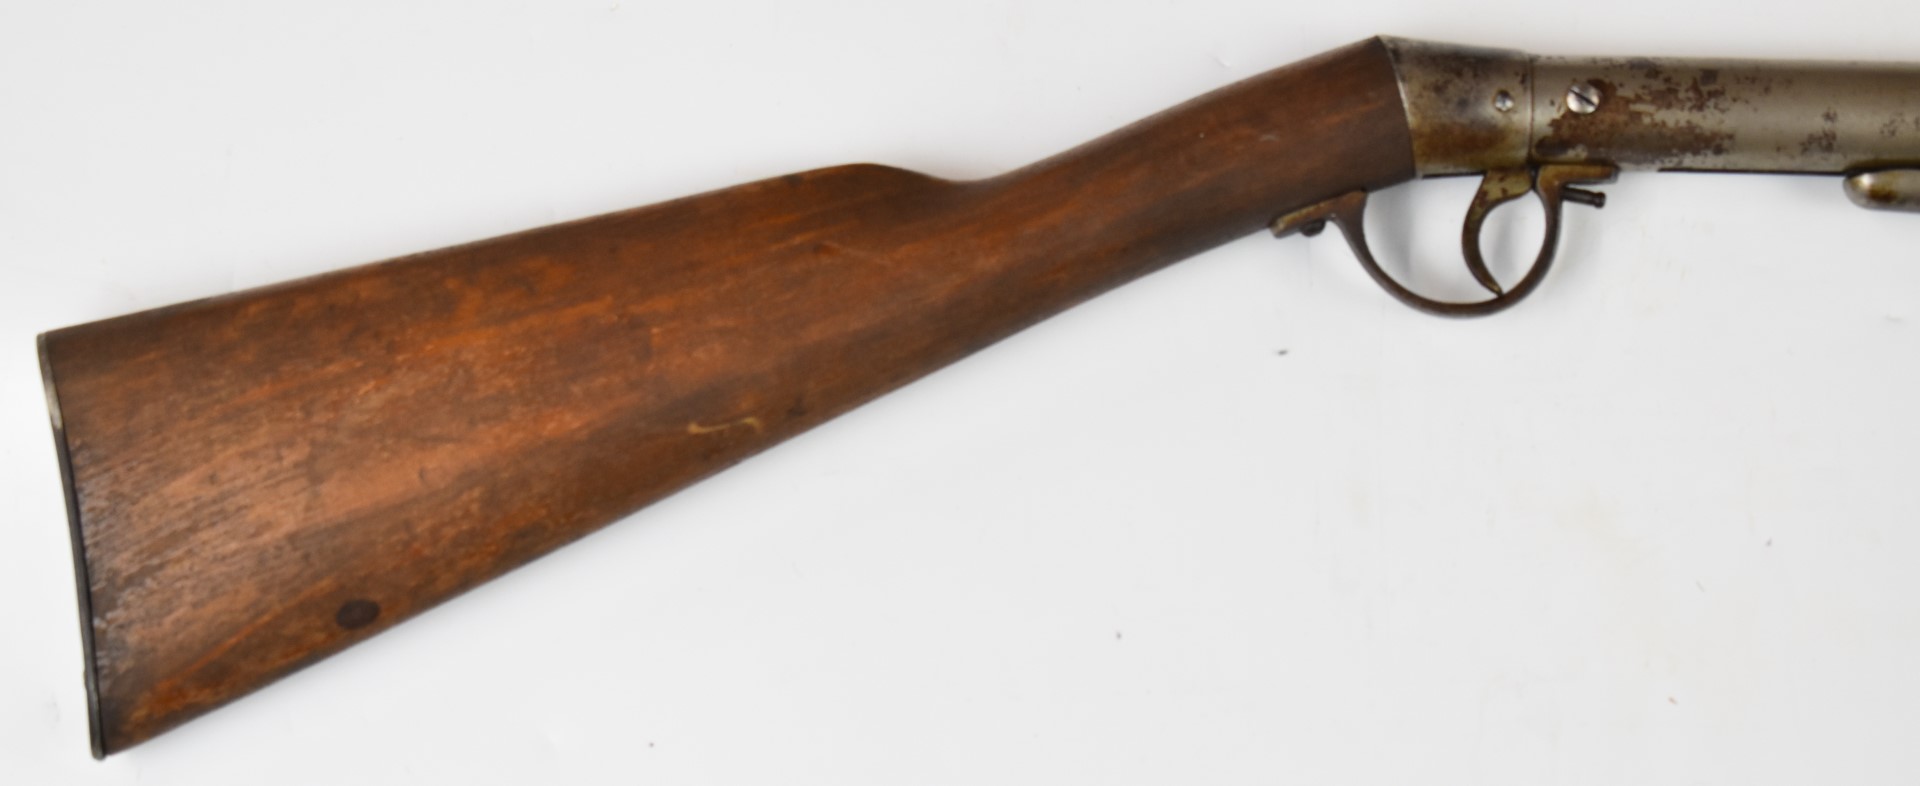 Friedrich Langenhan The Millita Patent .177 air rifle with adjustable trigger and alignment - Image 3 of 7